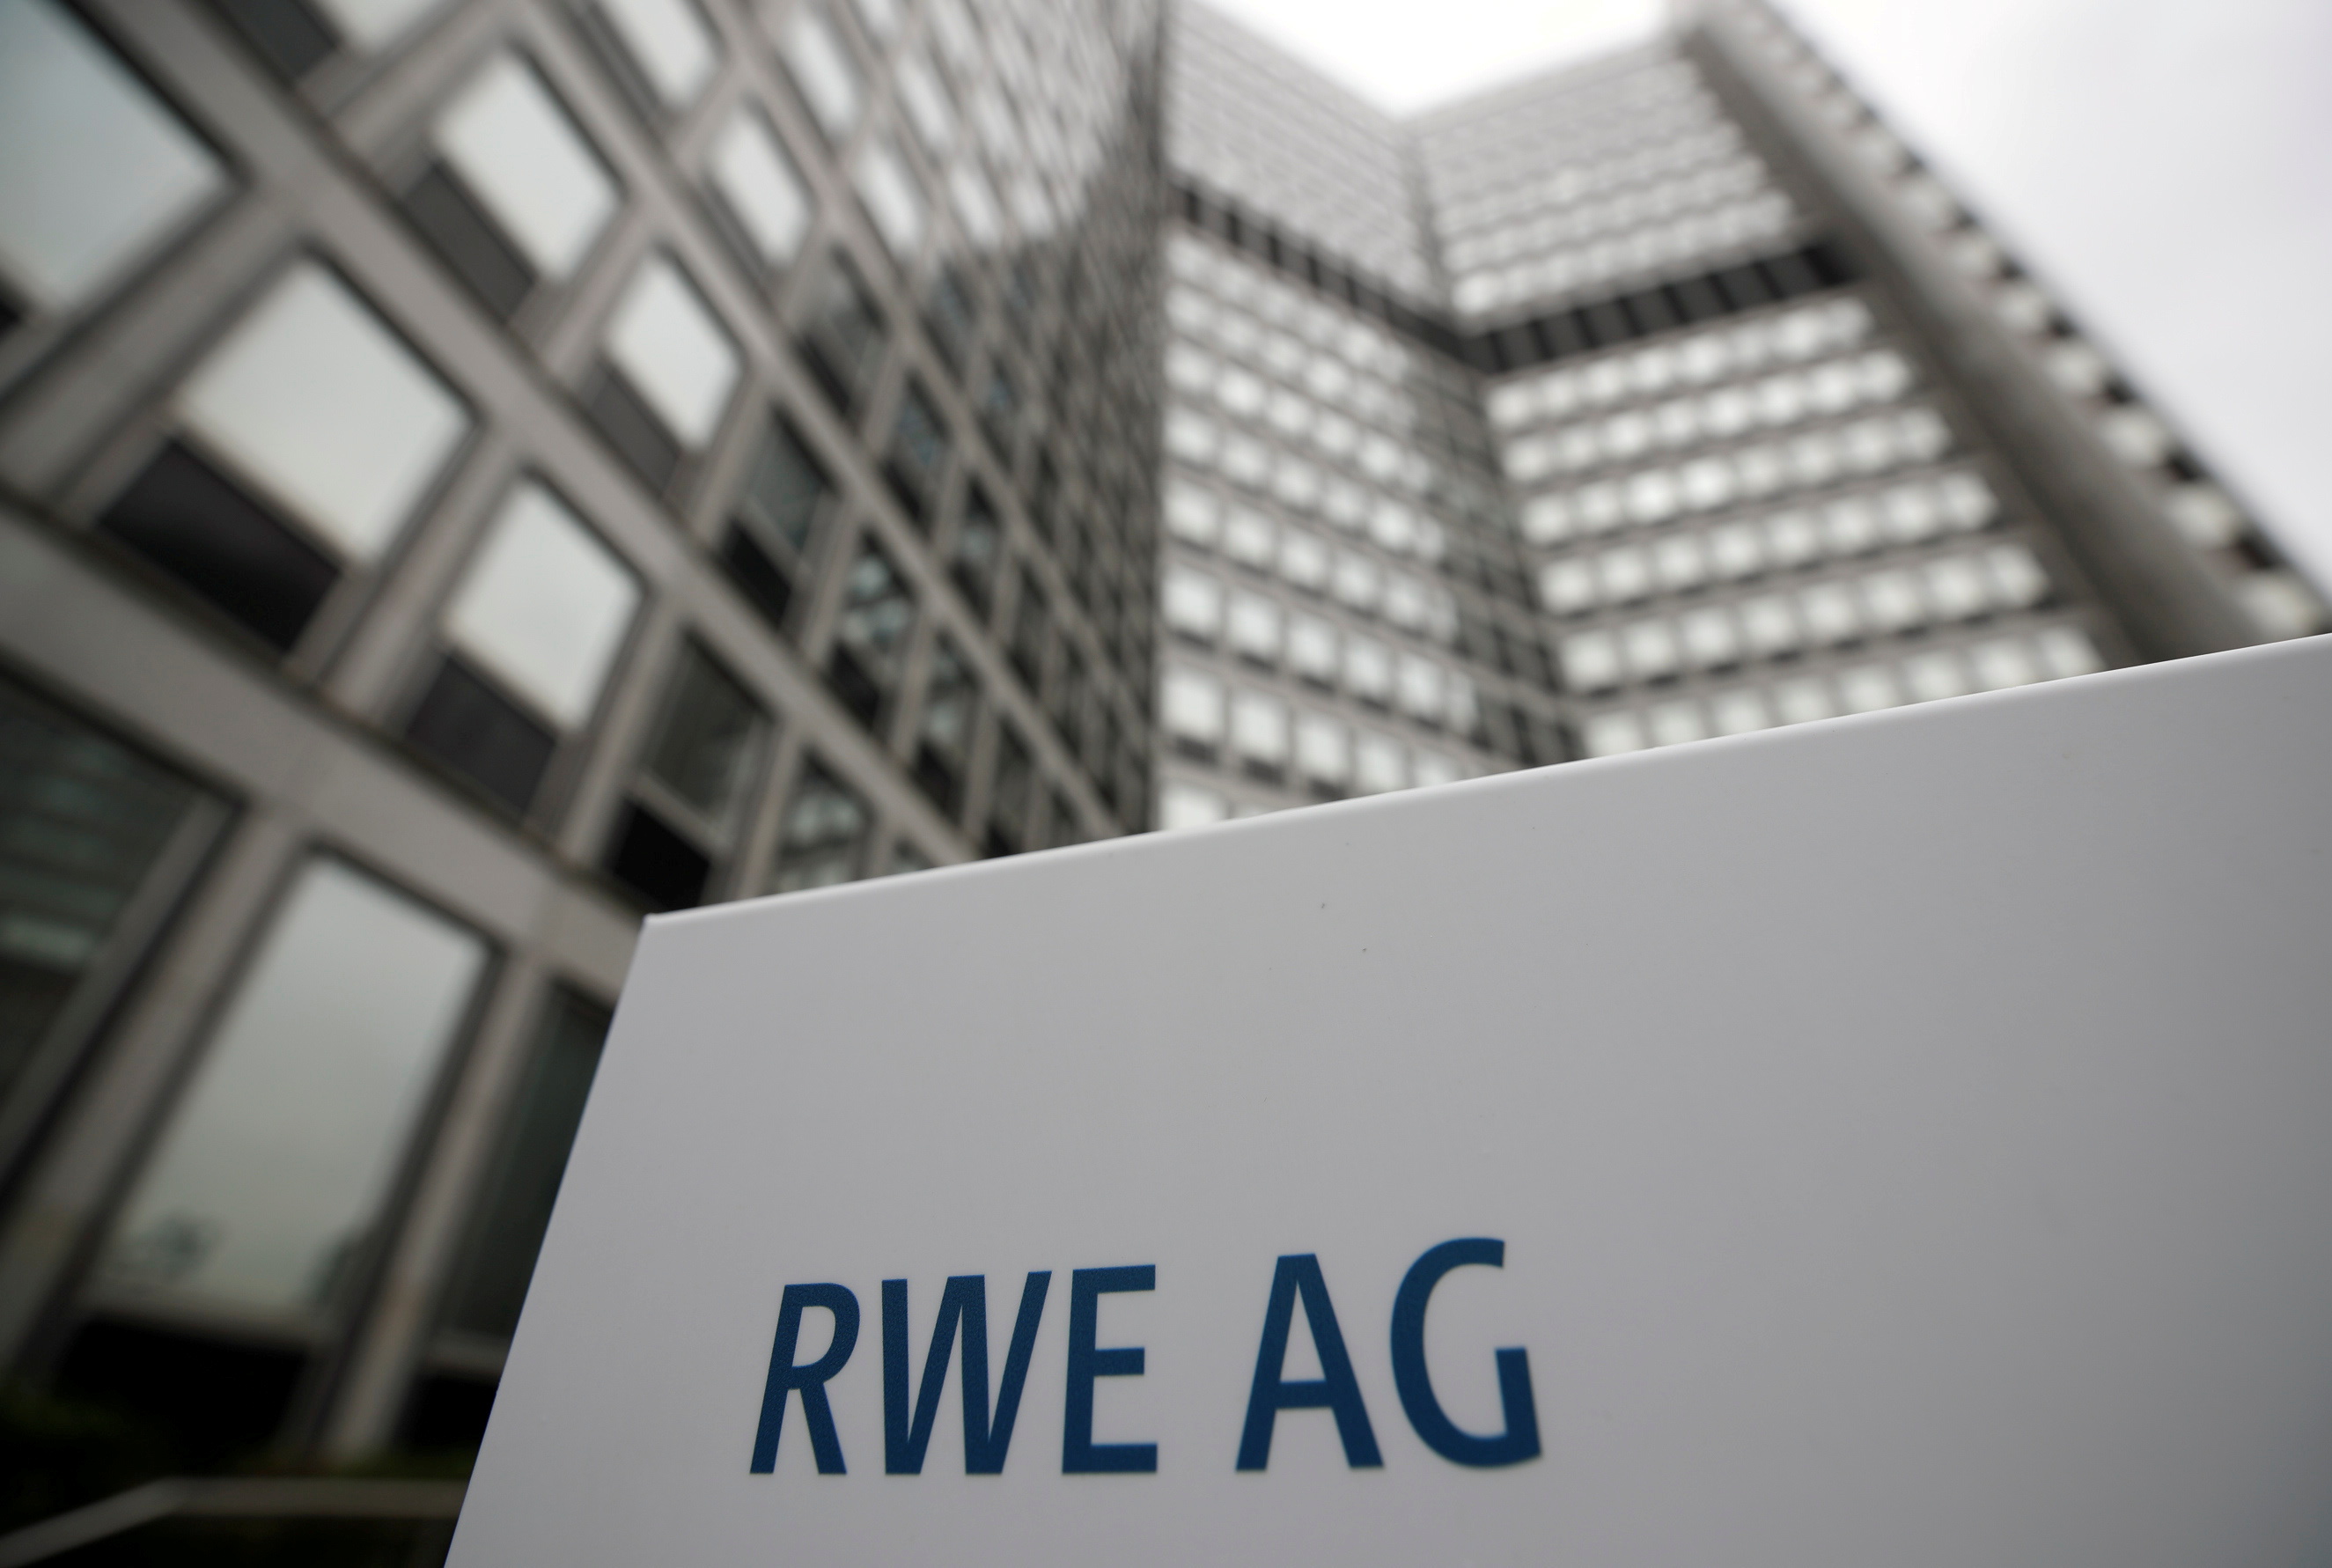 The headquarters of the German power supplier RWE, which plans to break up subsidiary Innogy and share its assets with rival E.ON, is pictured in Essen